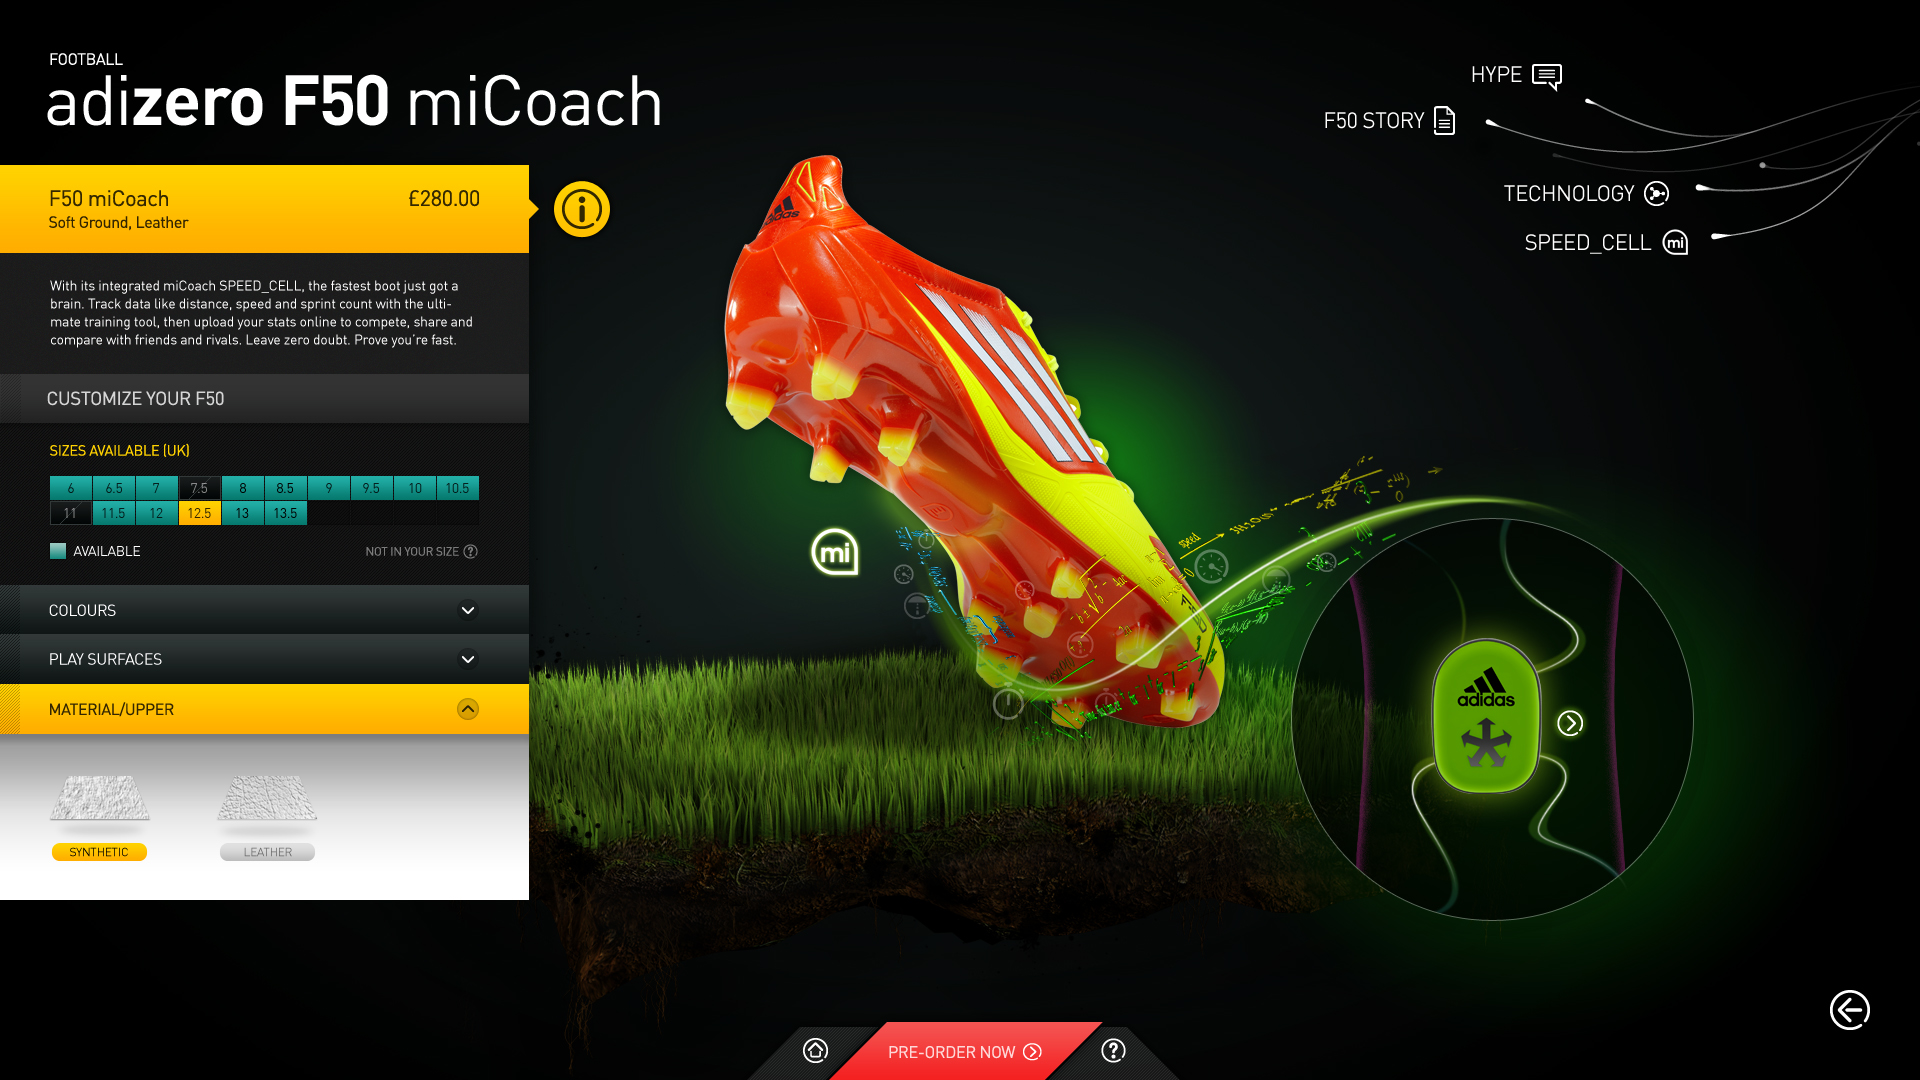 adidas micoach shoes